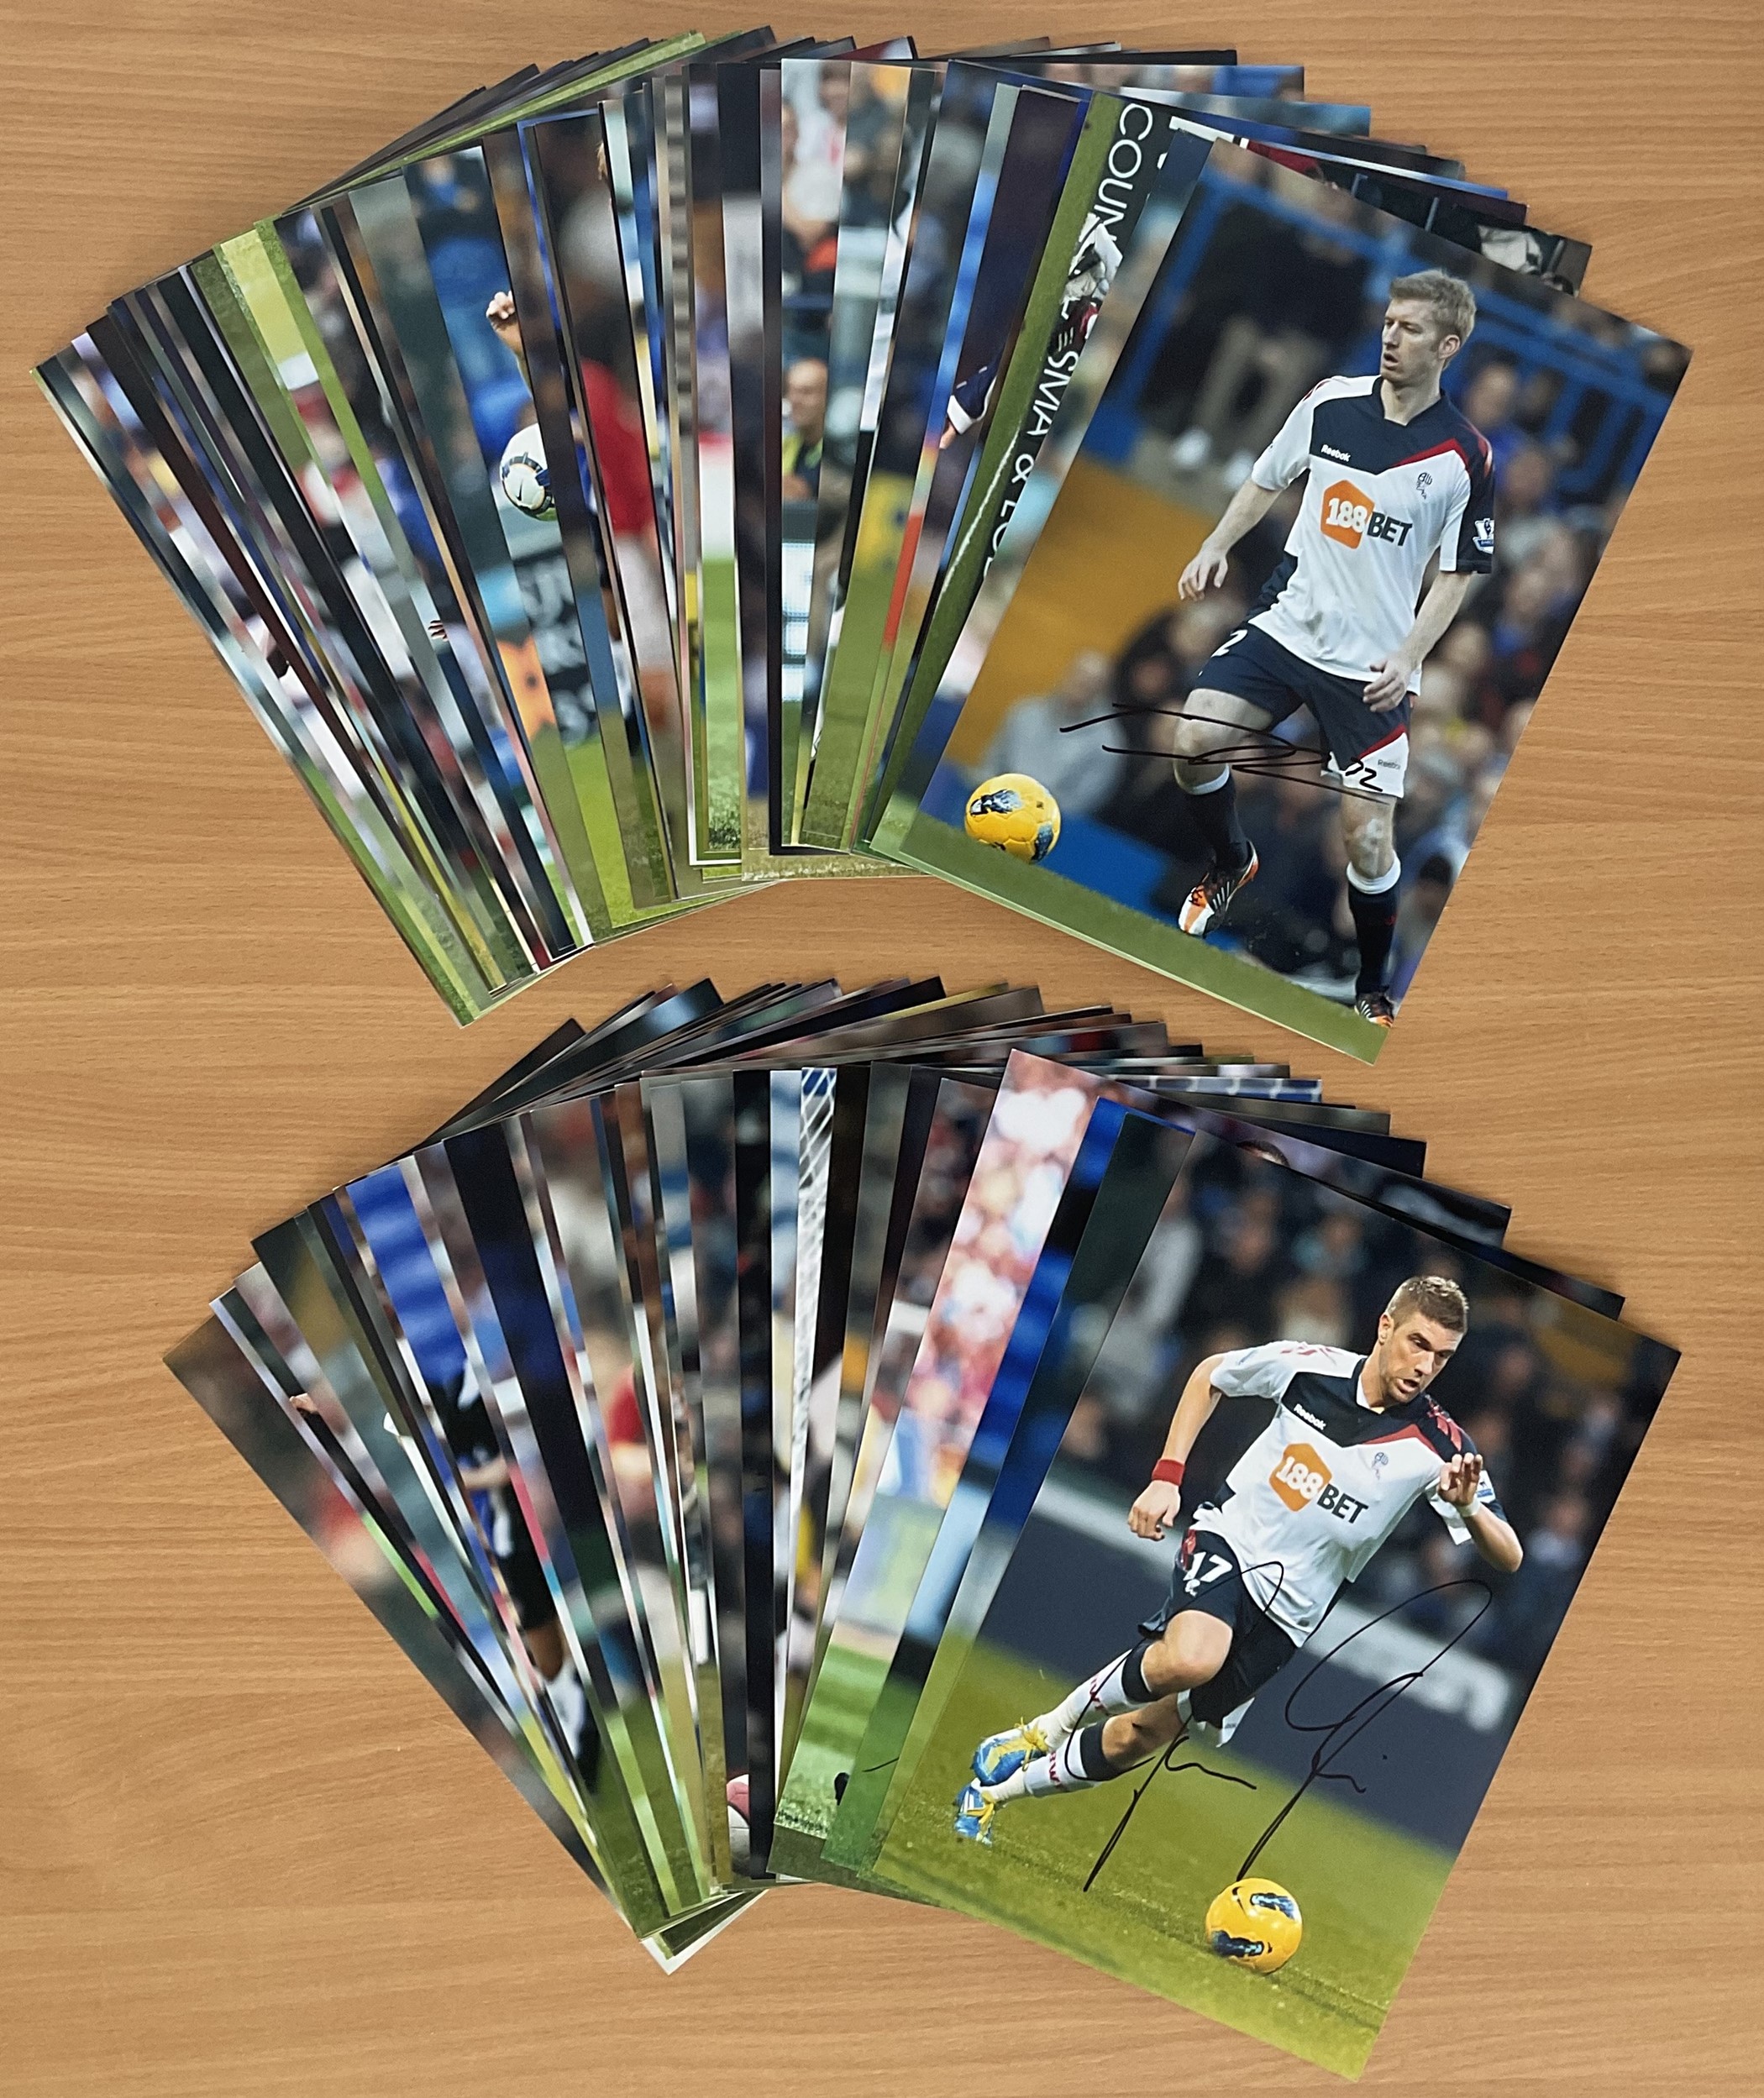 Football Bolton Wanderers collection approx. 100, signed photos includes some great names from the